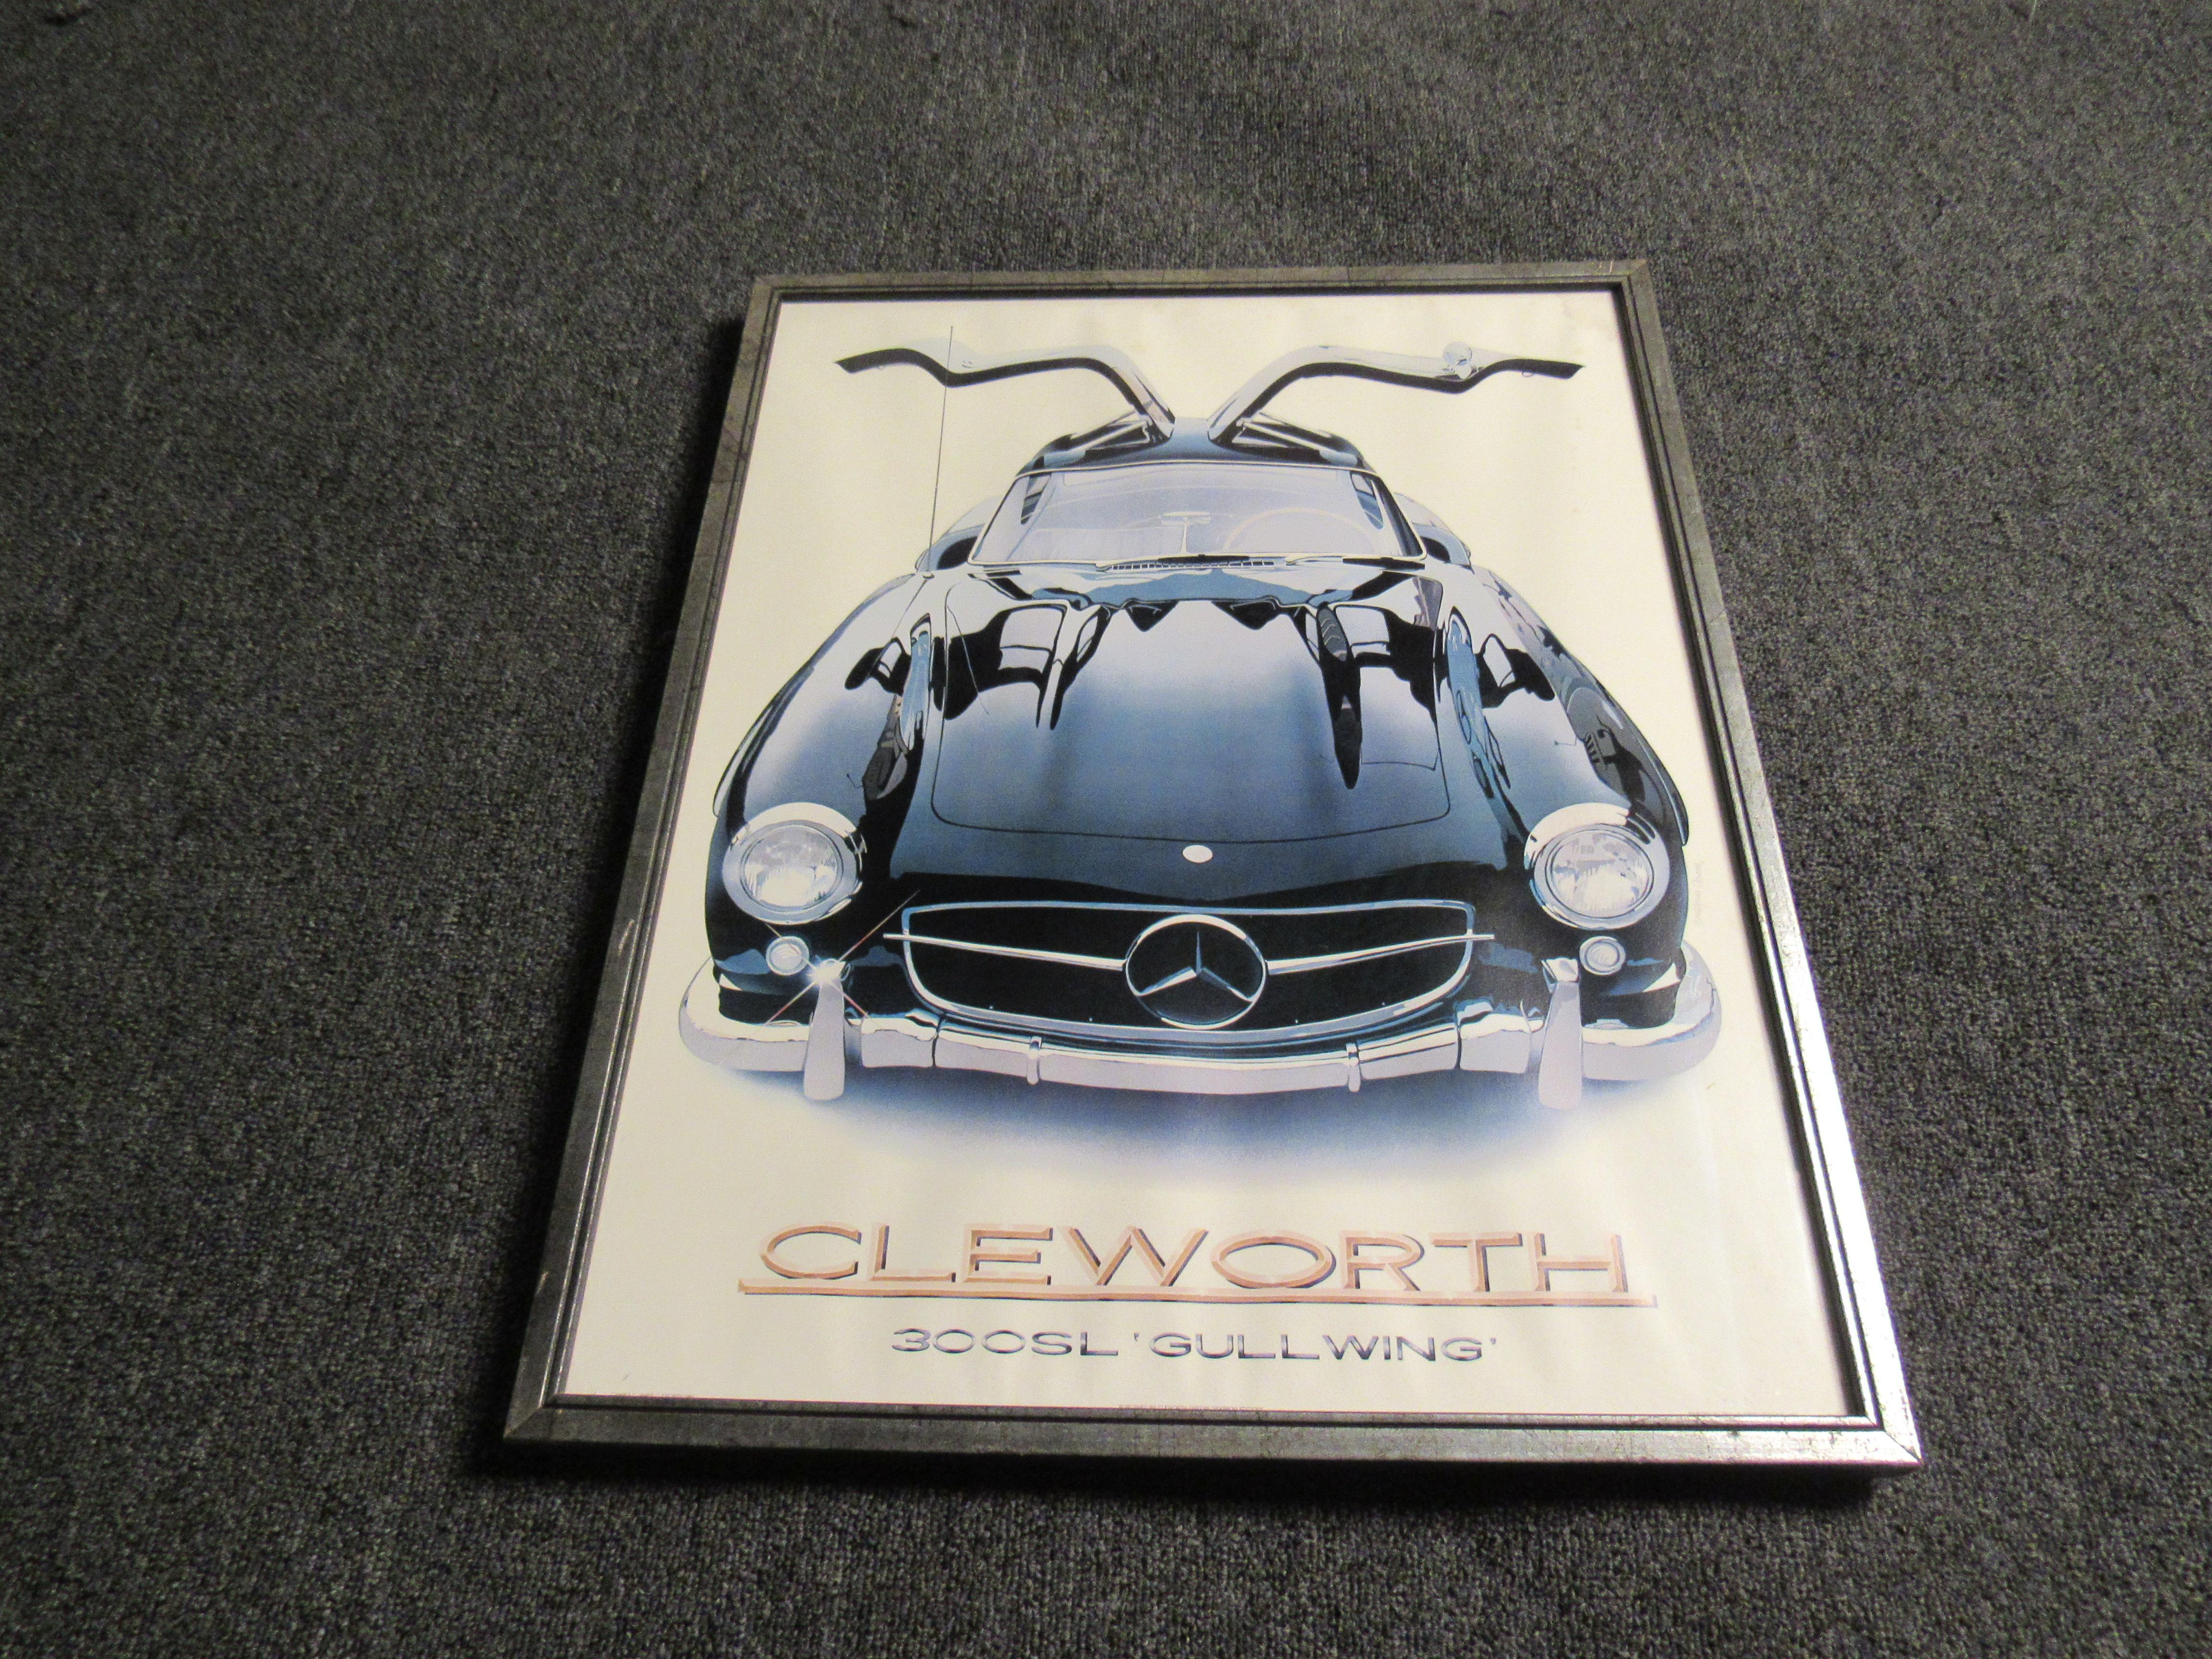 Vintage Mercedes Benz Gullwing Lithograph by Harold James Chelworth In Good Condition For Sale In Brooklyn, NY